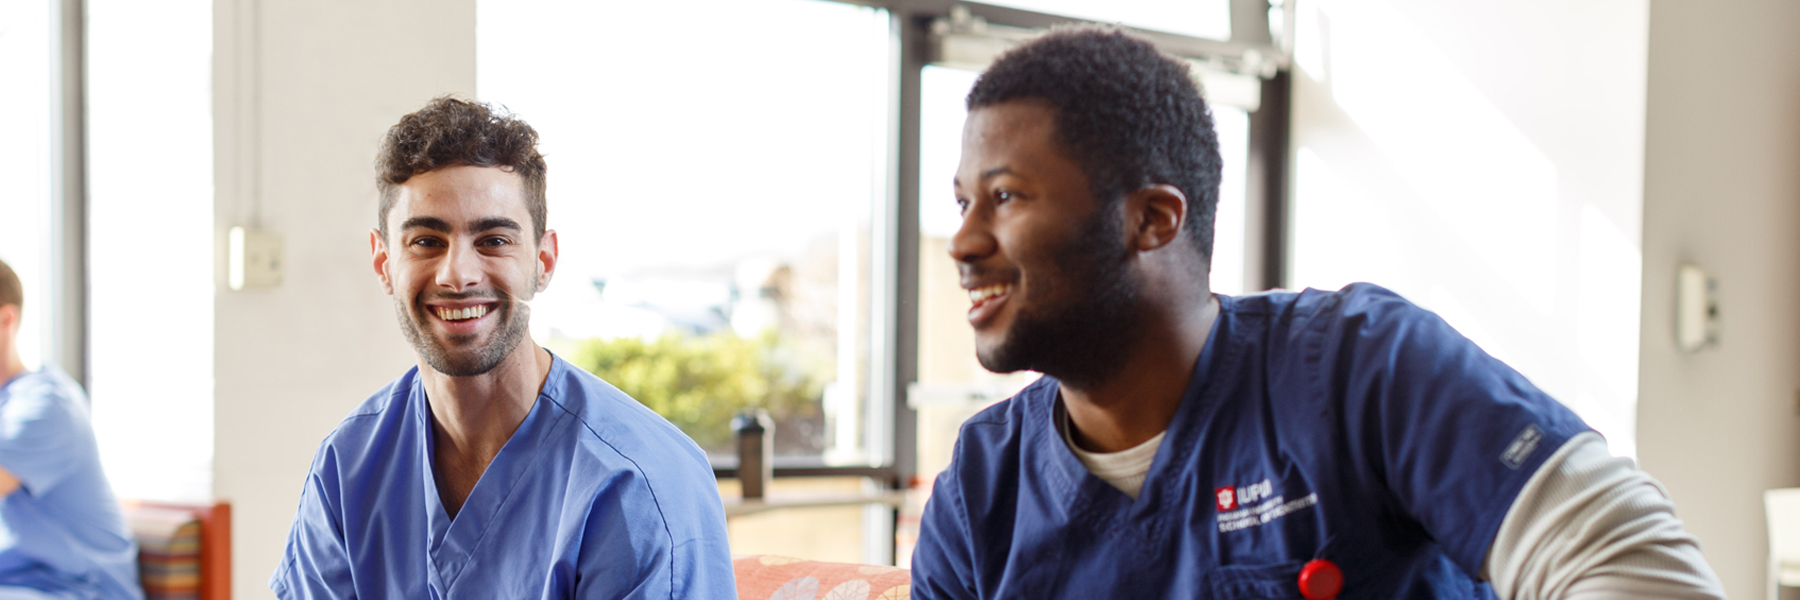 Two male dentistry students sit together and smile in a student common space.